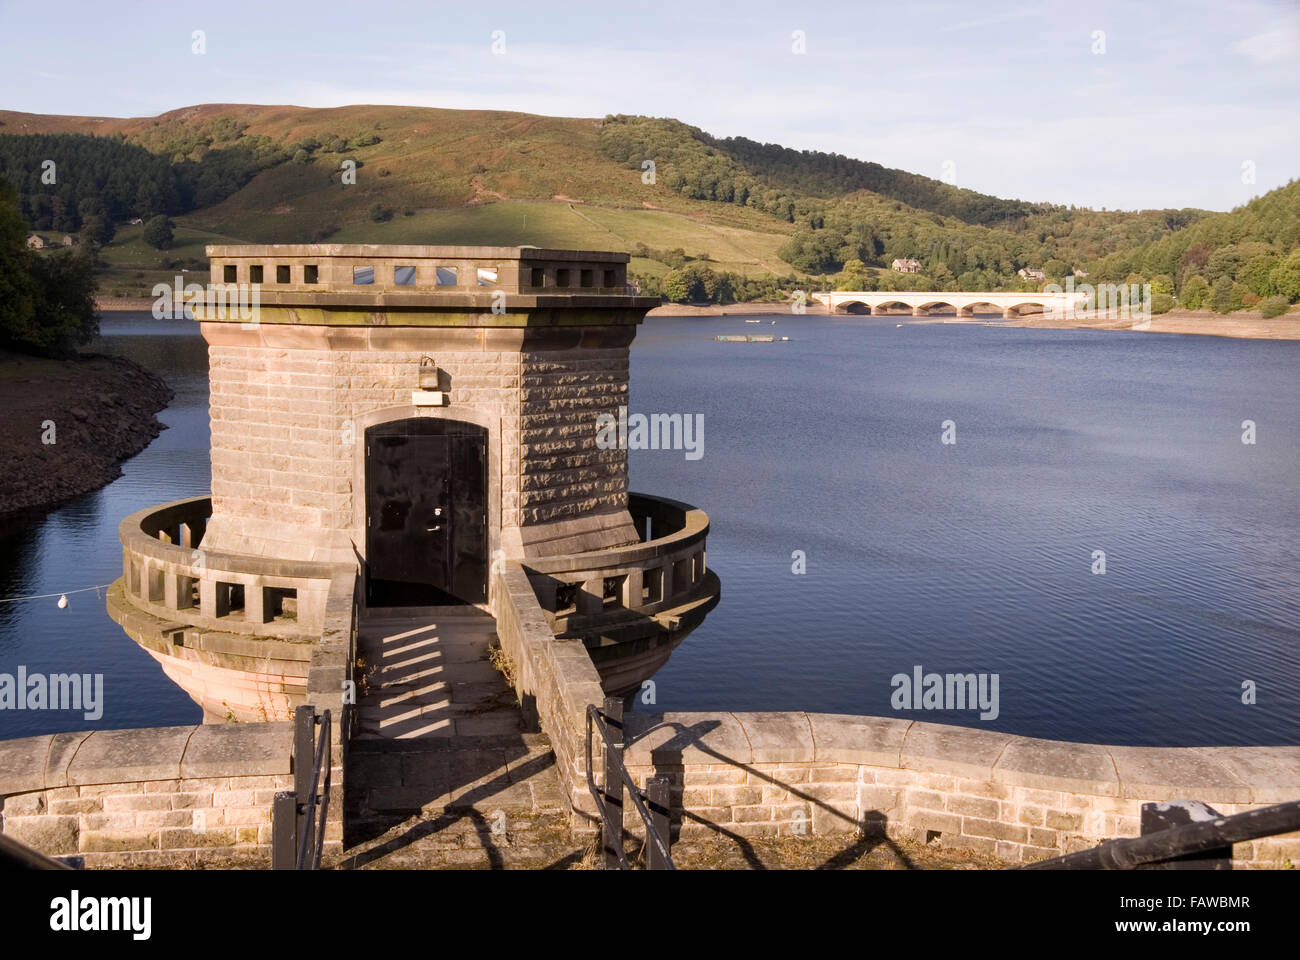 DERBYSHIRE UK - 06 Oct : Ladybower Reservoir west draw off tower and A6013 Bridge on 06 Oct 2013 in the Peak District, Derbyshir Stock Photo